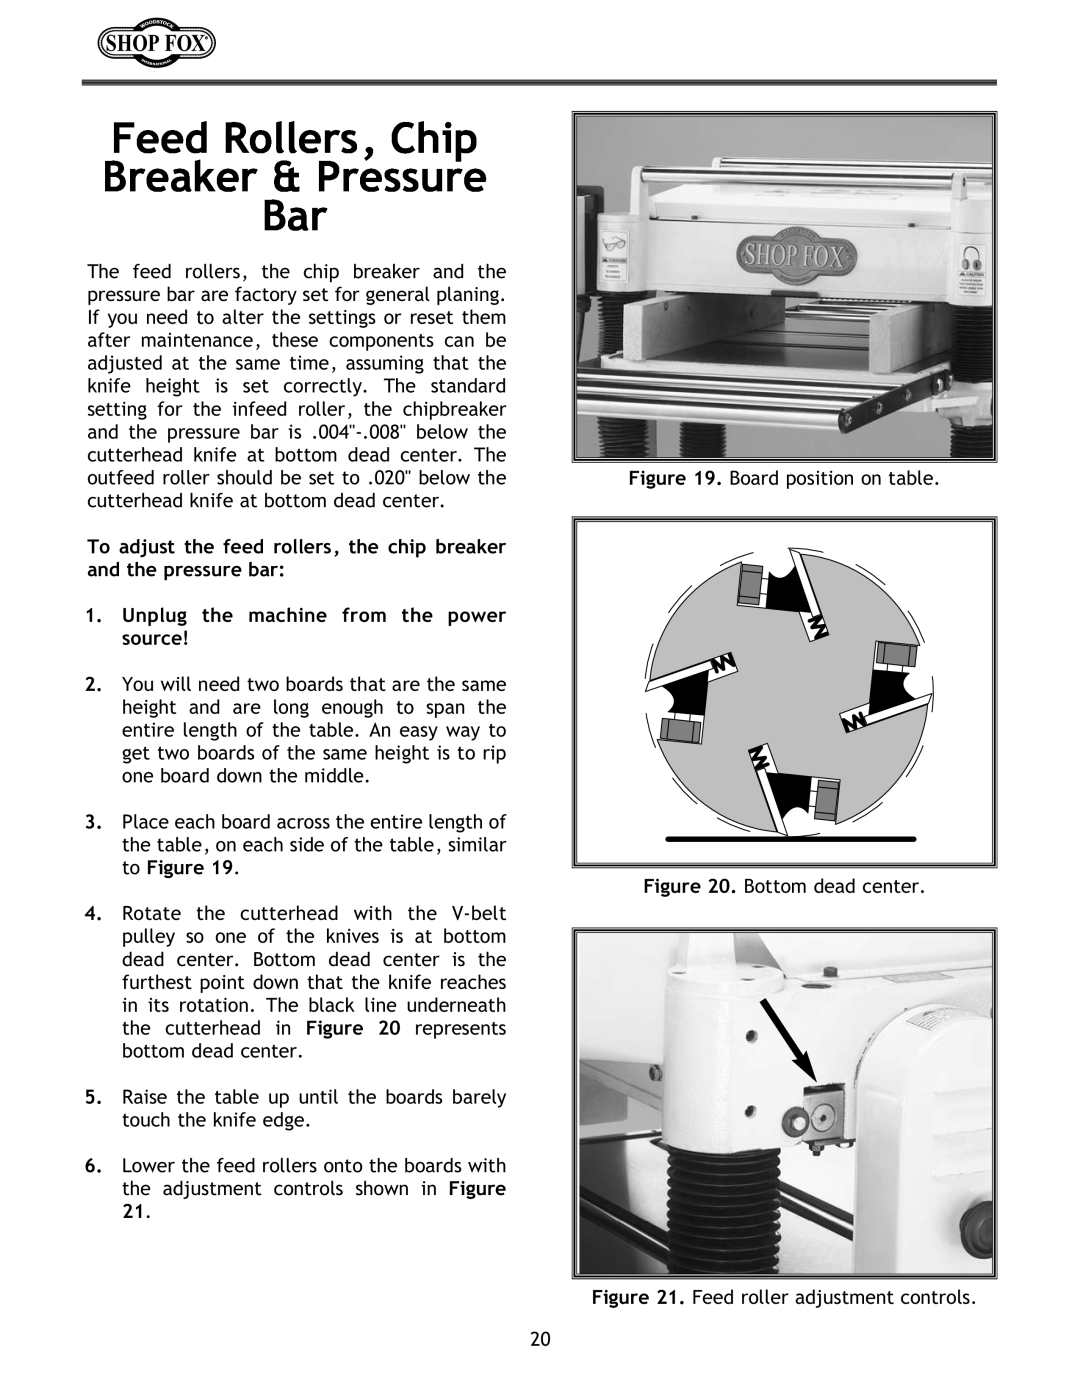 Woodstock W1683 instruction manual Feed Rollers, Chip Breaker & Pressure Bar, Unplug the machine from the power source 